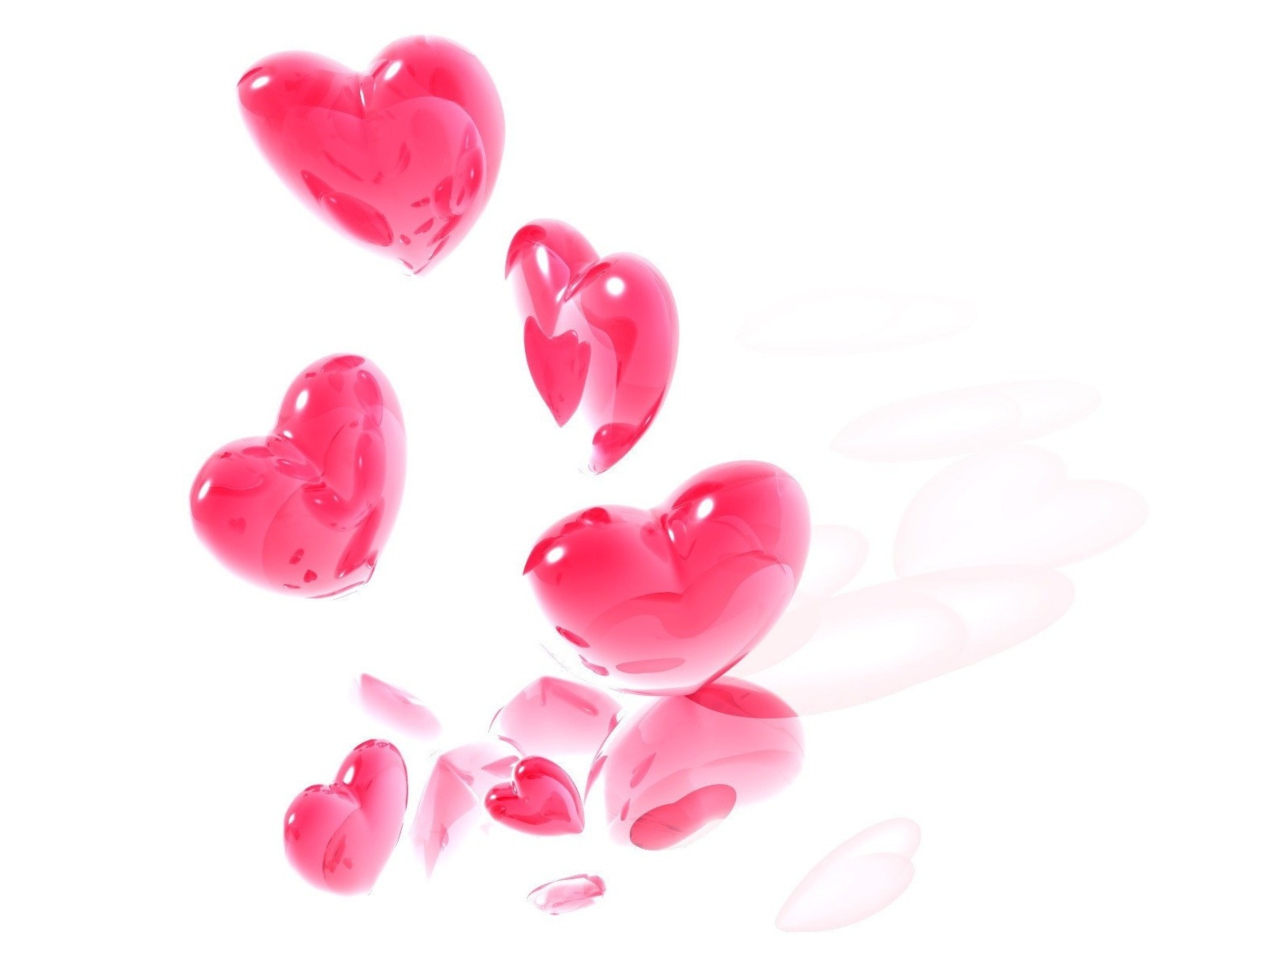 Das Abstract Pink Hearts On White Wallpaper 1280x960